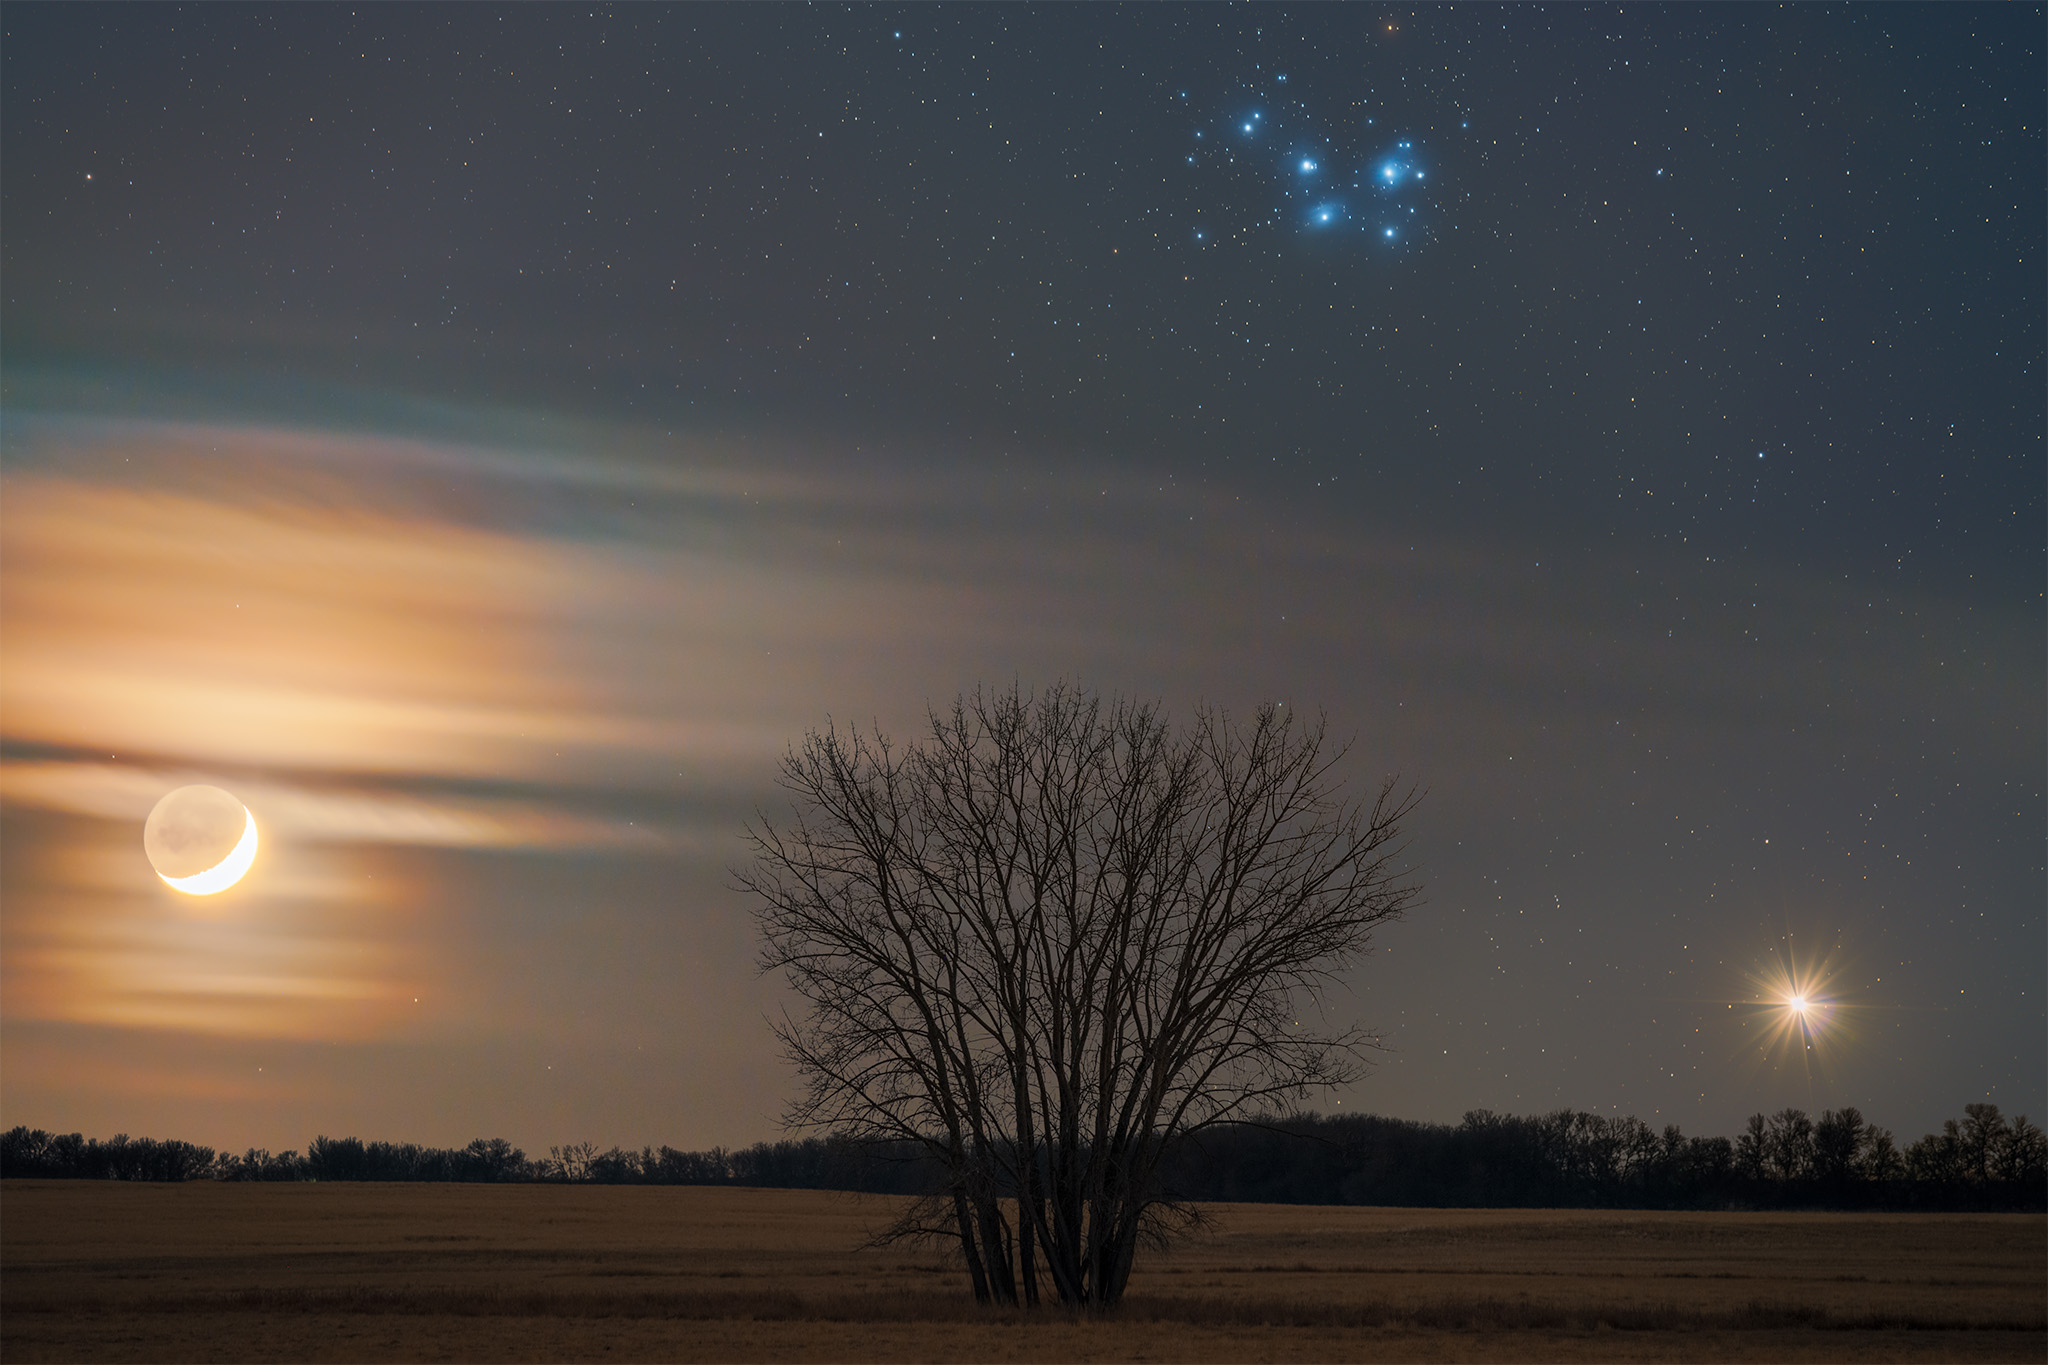 An astrophoto of the conjunction of the moon, Venus, and the Pleiades over the Saskatchewan landscape